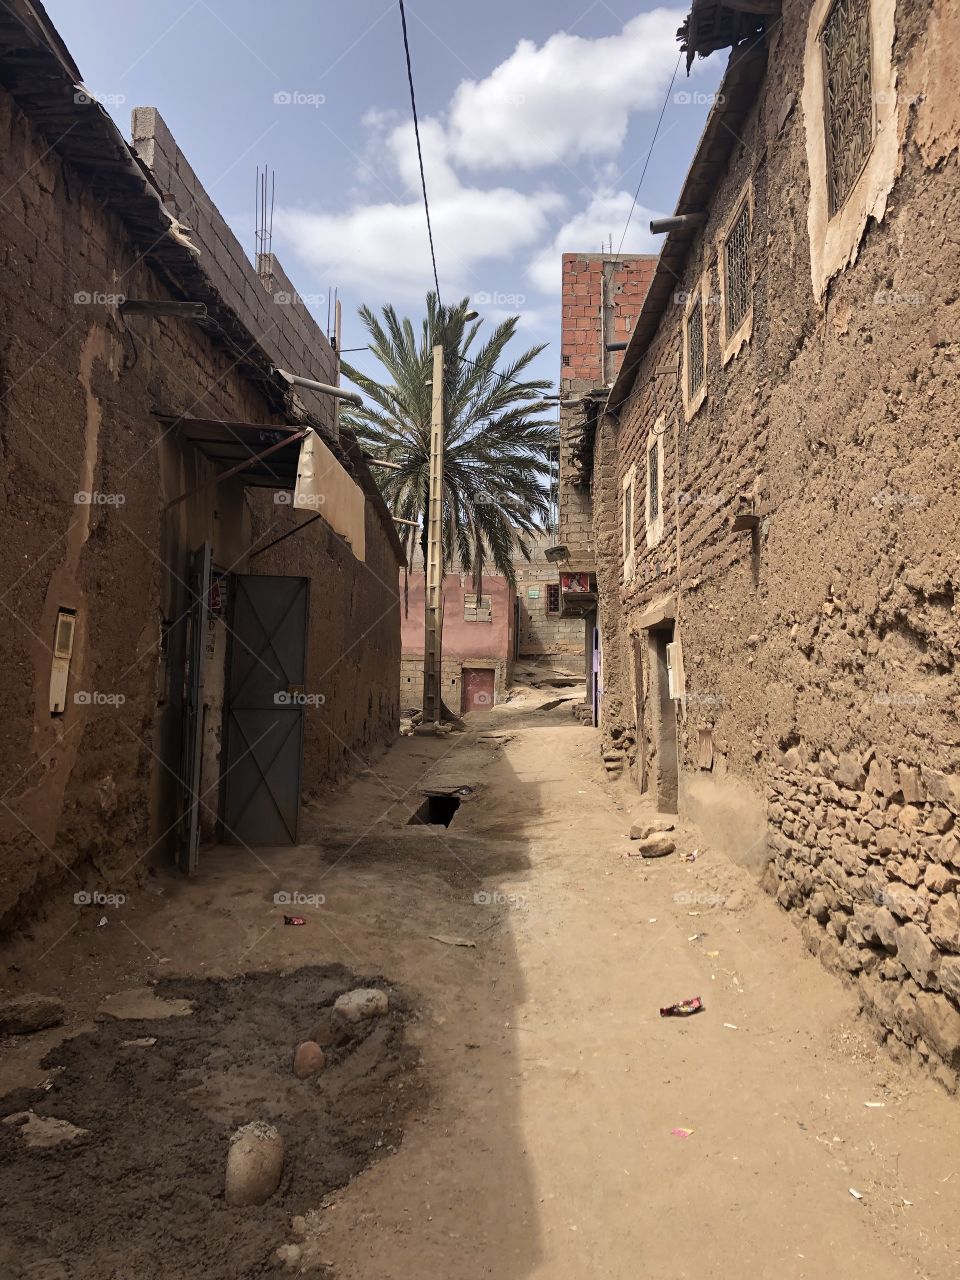 A rural Berber village in the Atlas mountain range, Morocco. The only language spoken here is a traditional African language that’s nothing like Arabic which is spoken throughout the rest of the country and surrounding area. It’s an incredible town.